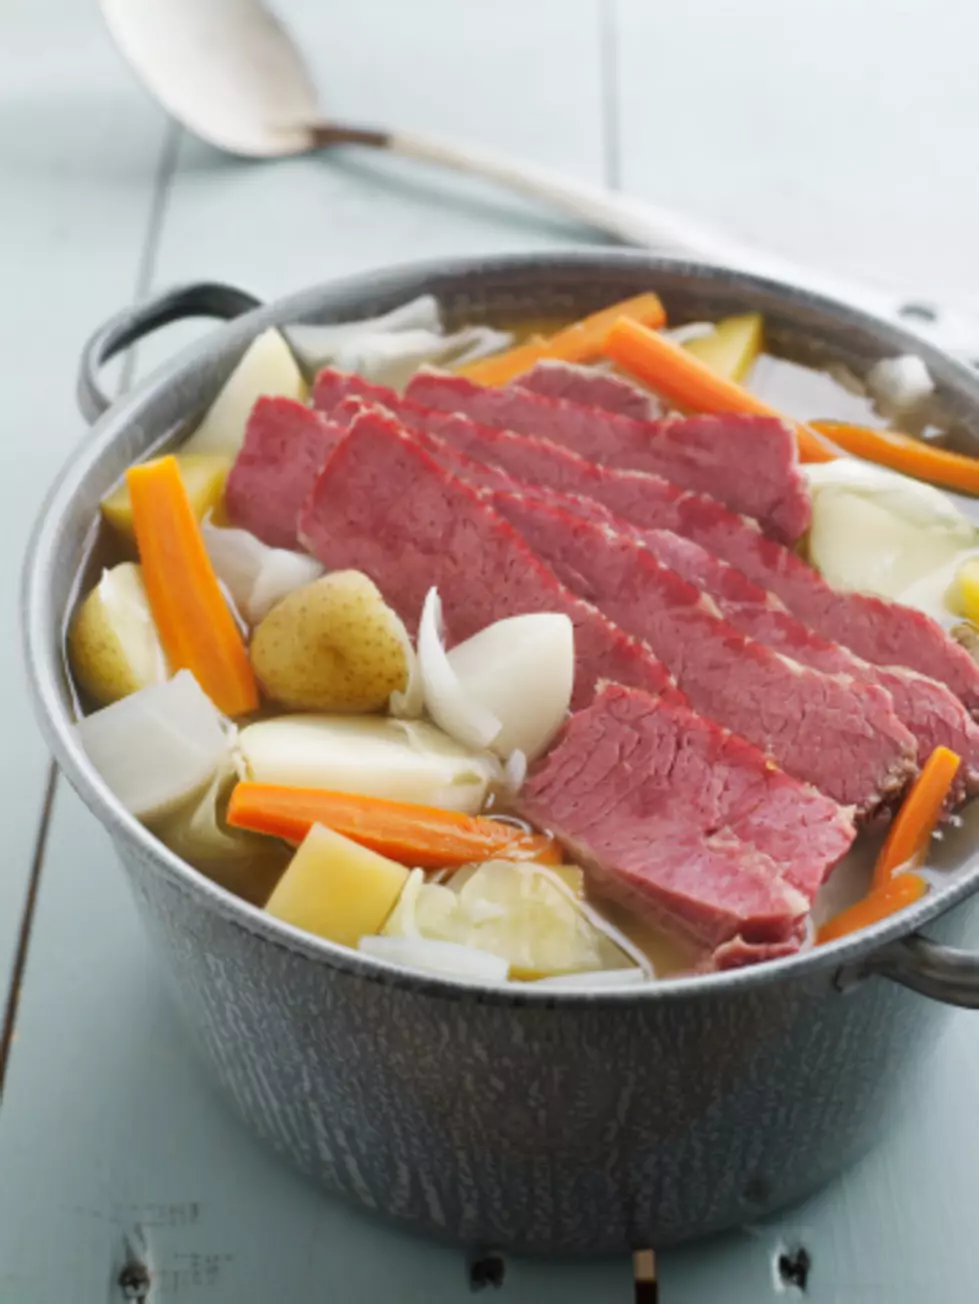 How To Make Corned Beef And Cabbage for St. Paddy&#8217;s Day